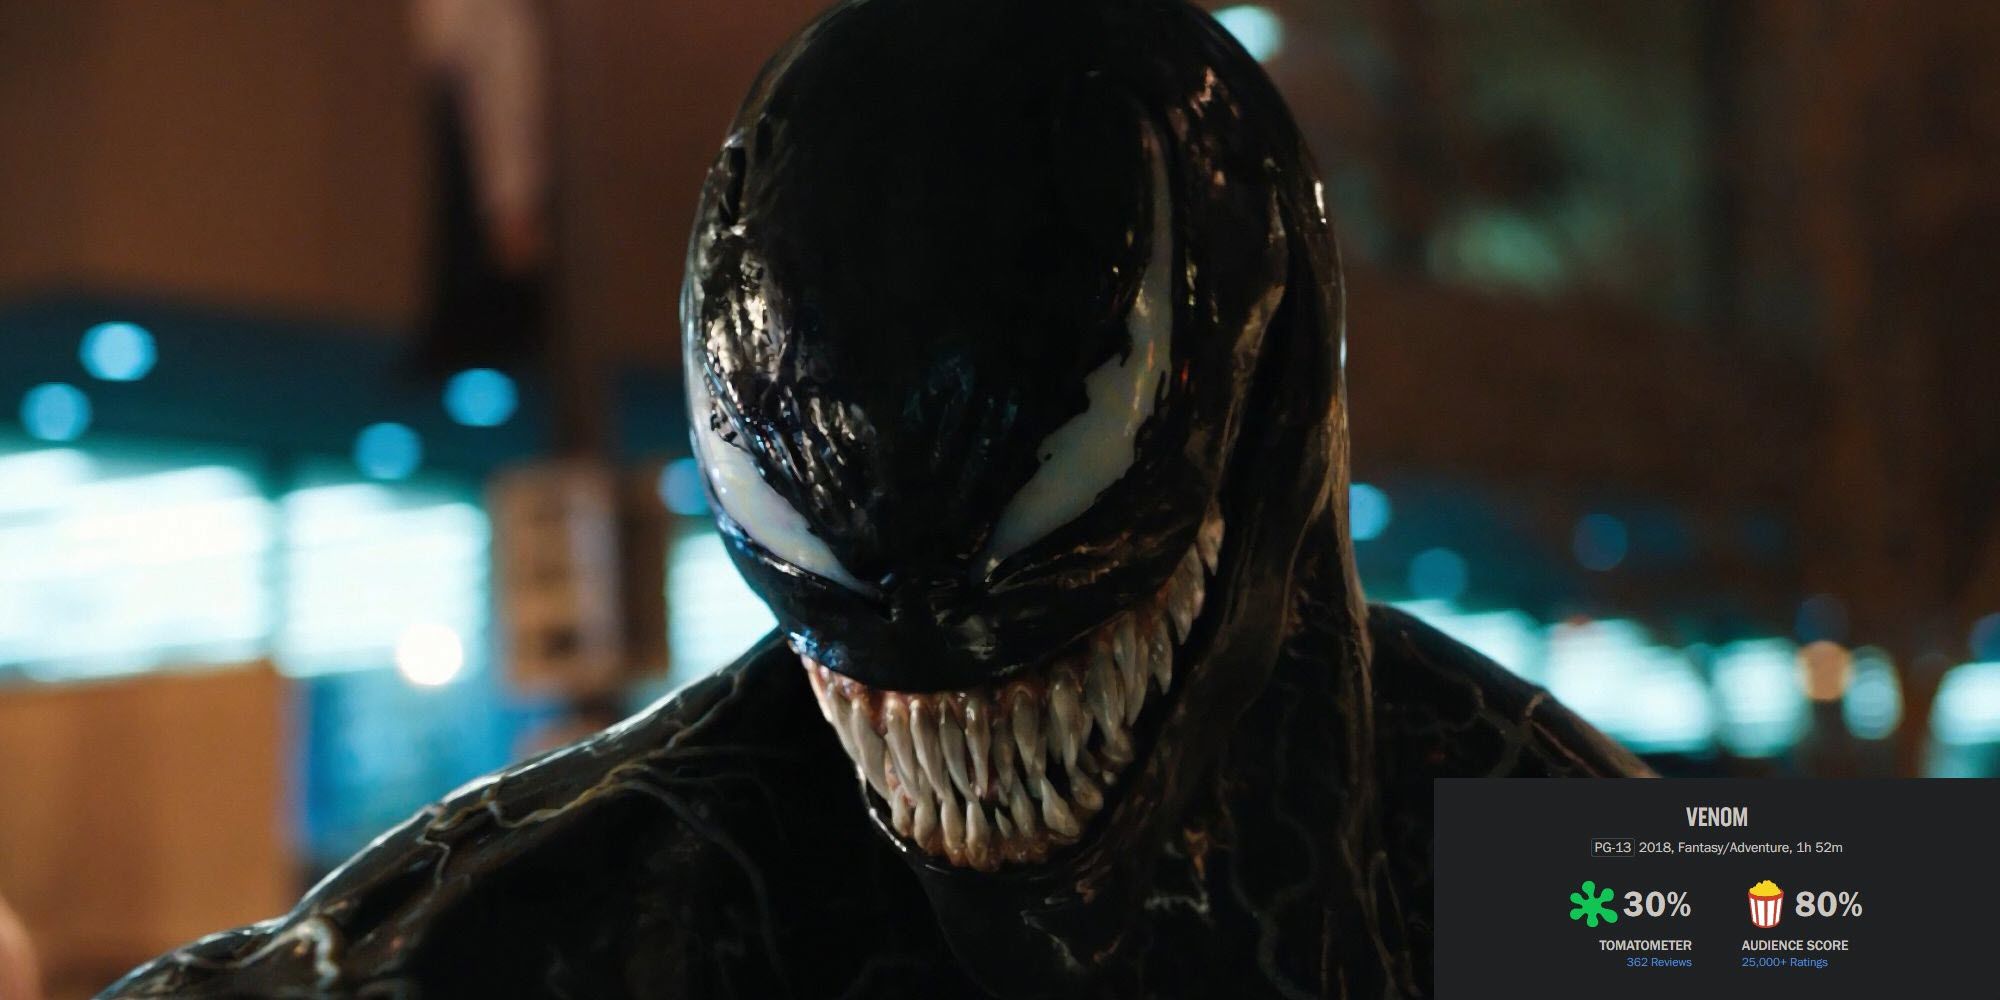 image from the 2018 film Venom featuring the symbiote Venom smiling menacingly with his teeth bare